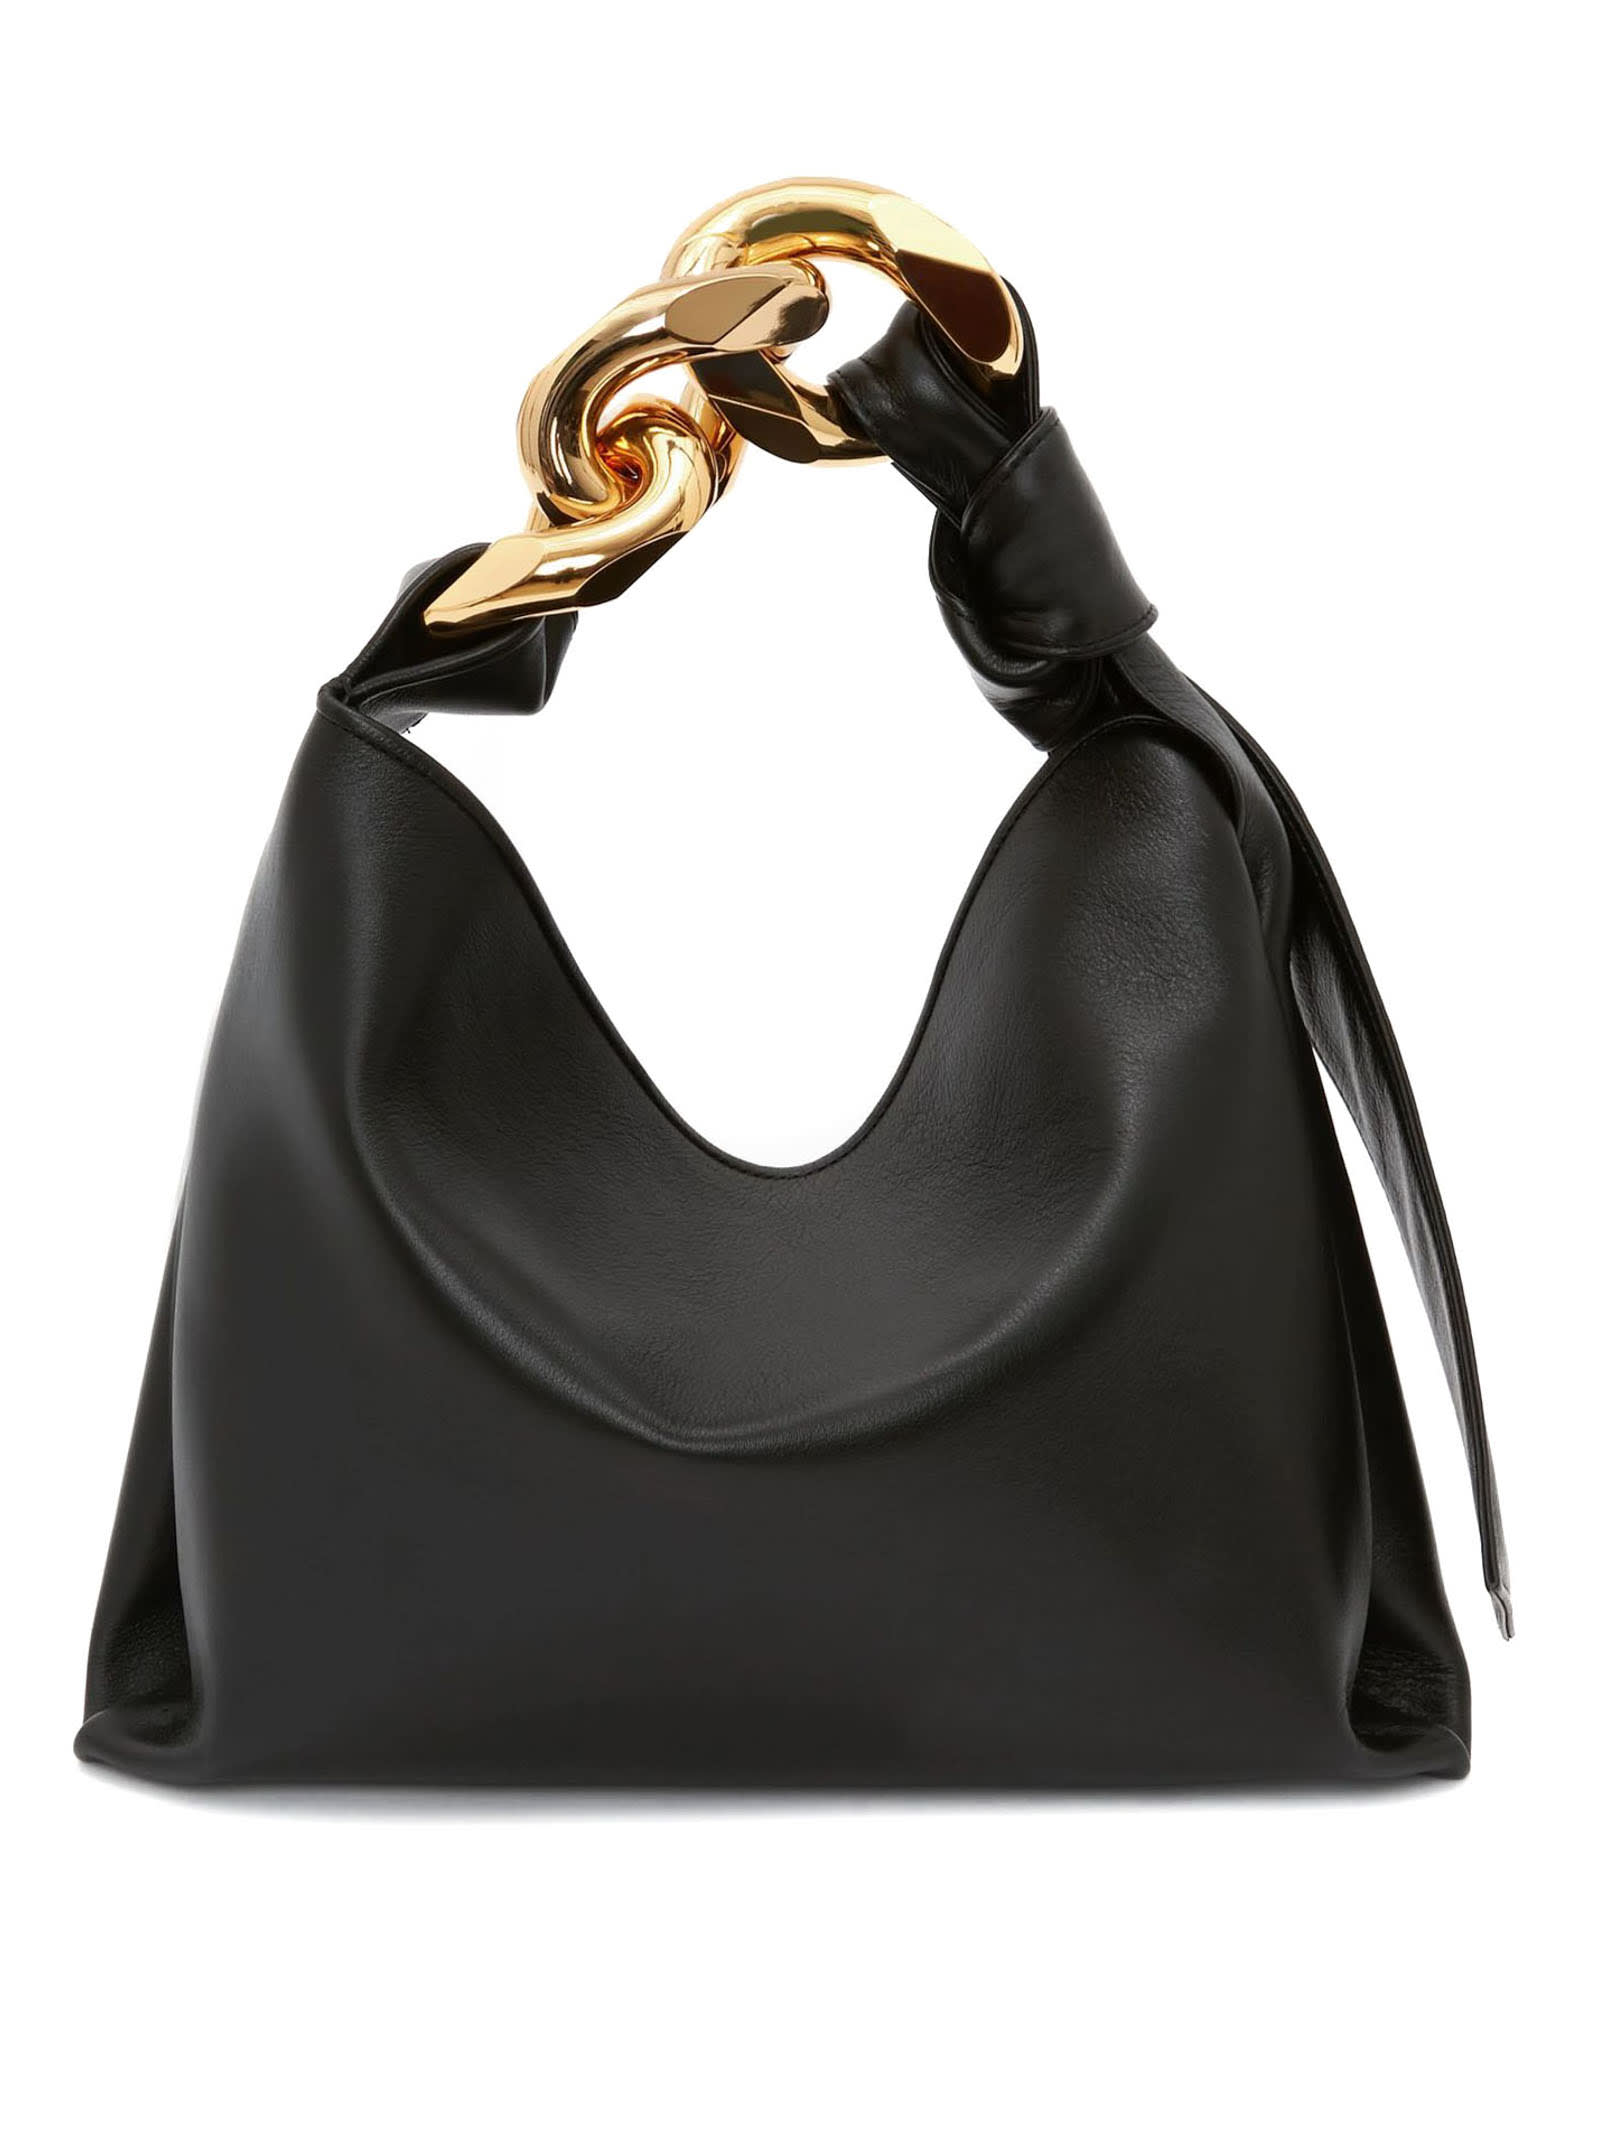 J.W. Anderson Black Leather Chain Hobo